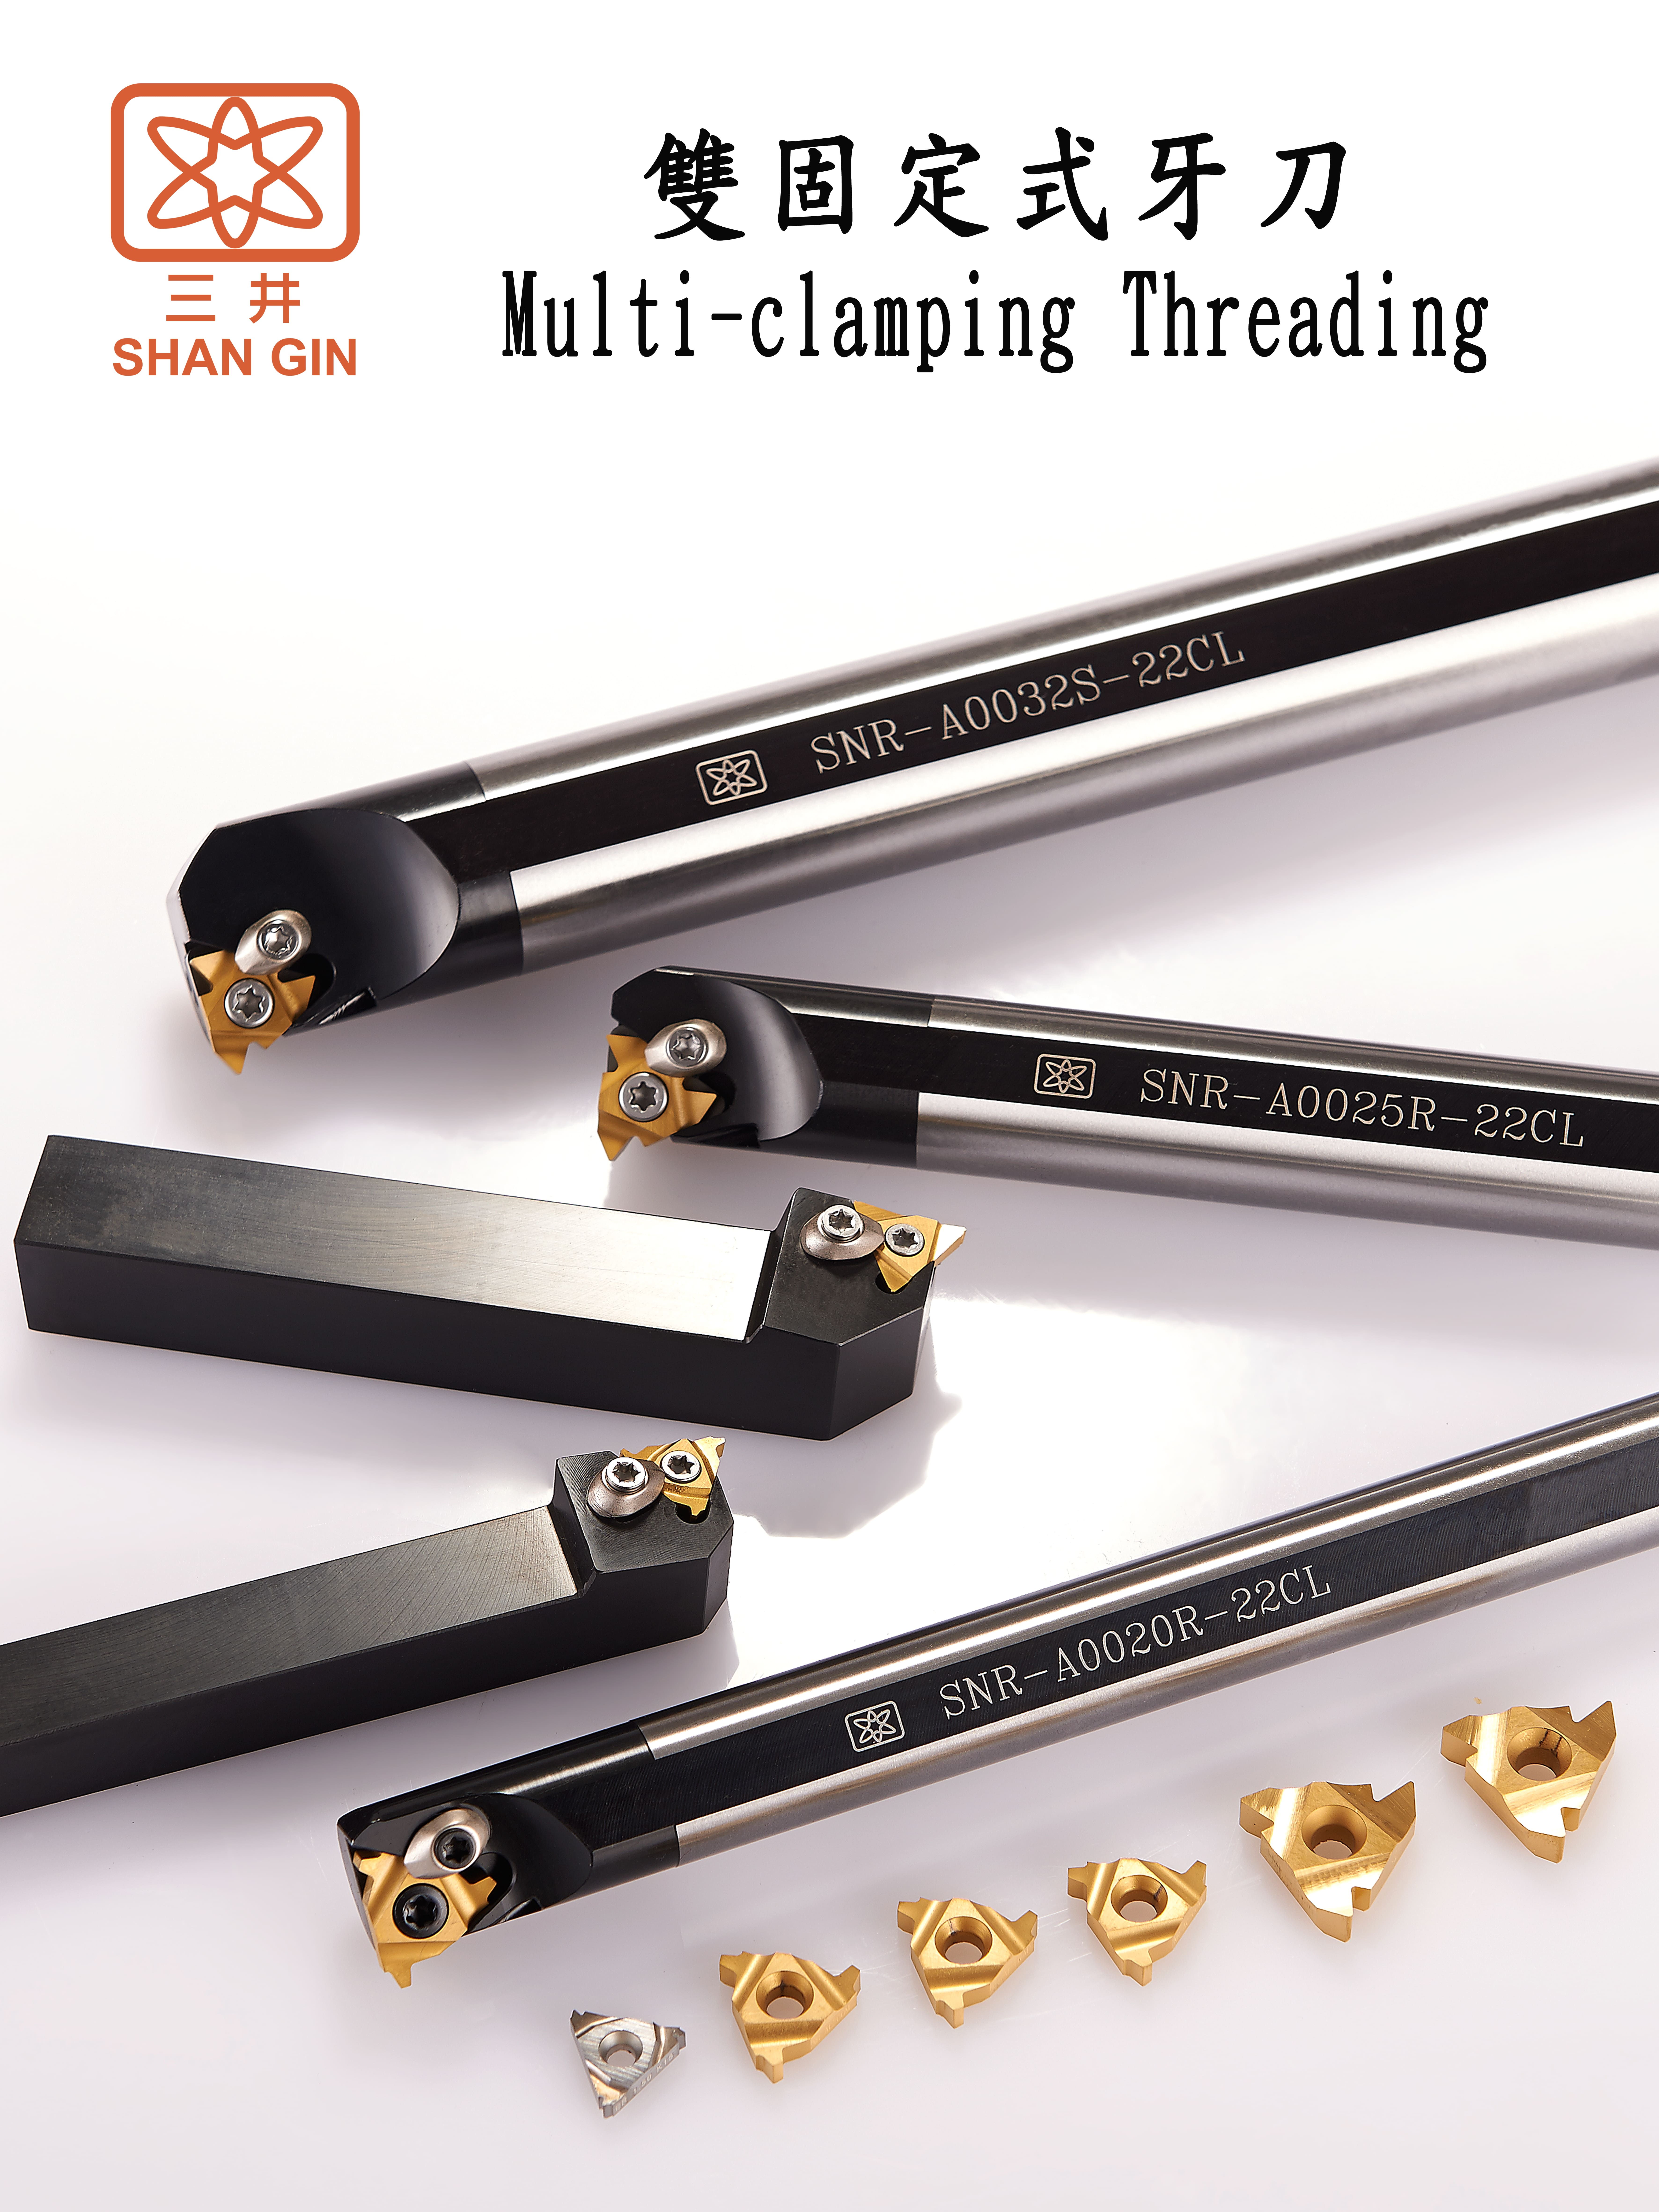 Products|Multi-clamping Threading